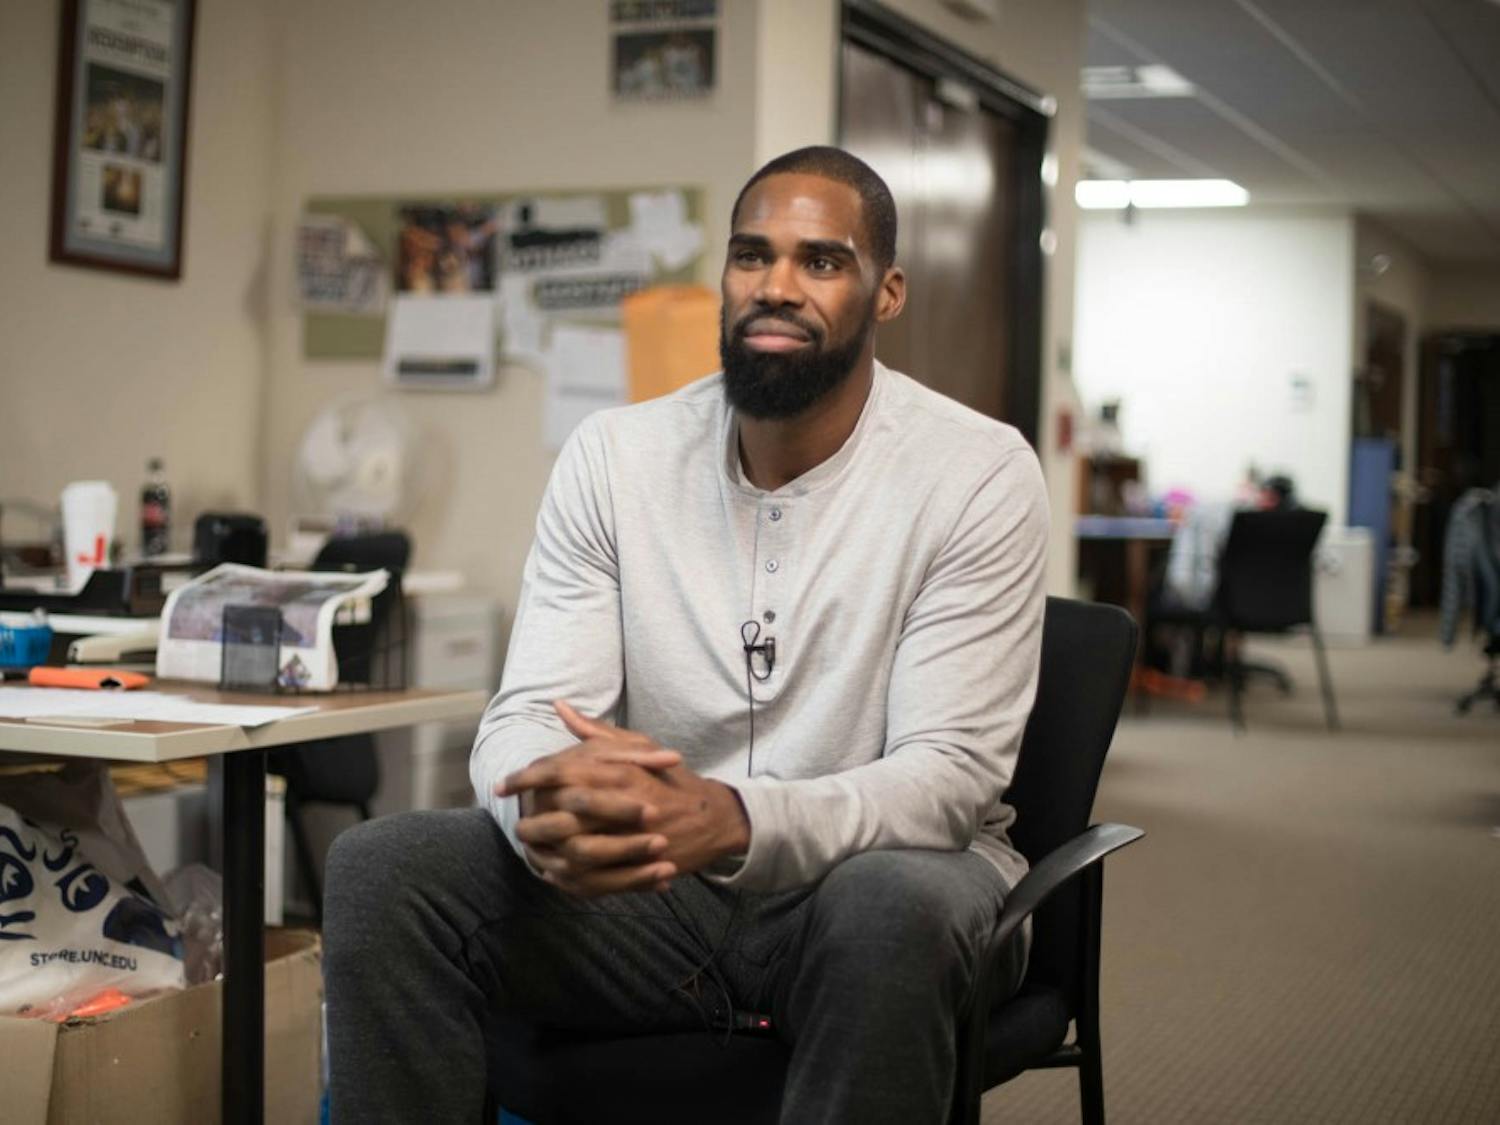 Antawn Jamison visits The Daily Tar Heel office on Tuesday, Jan. 29, 2019.